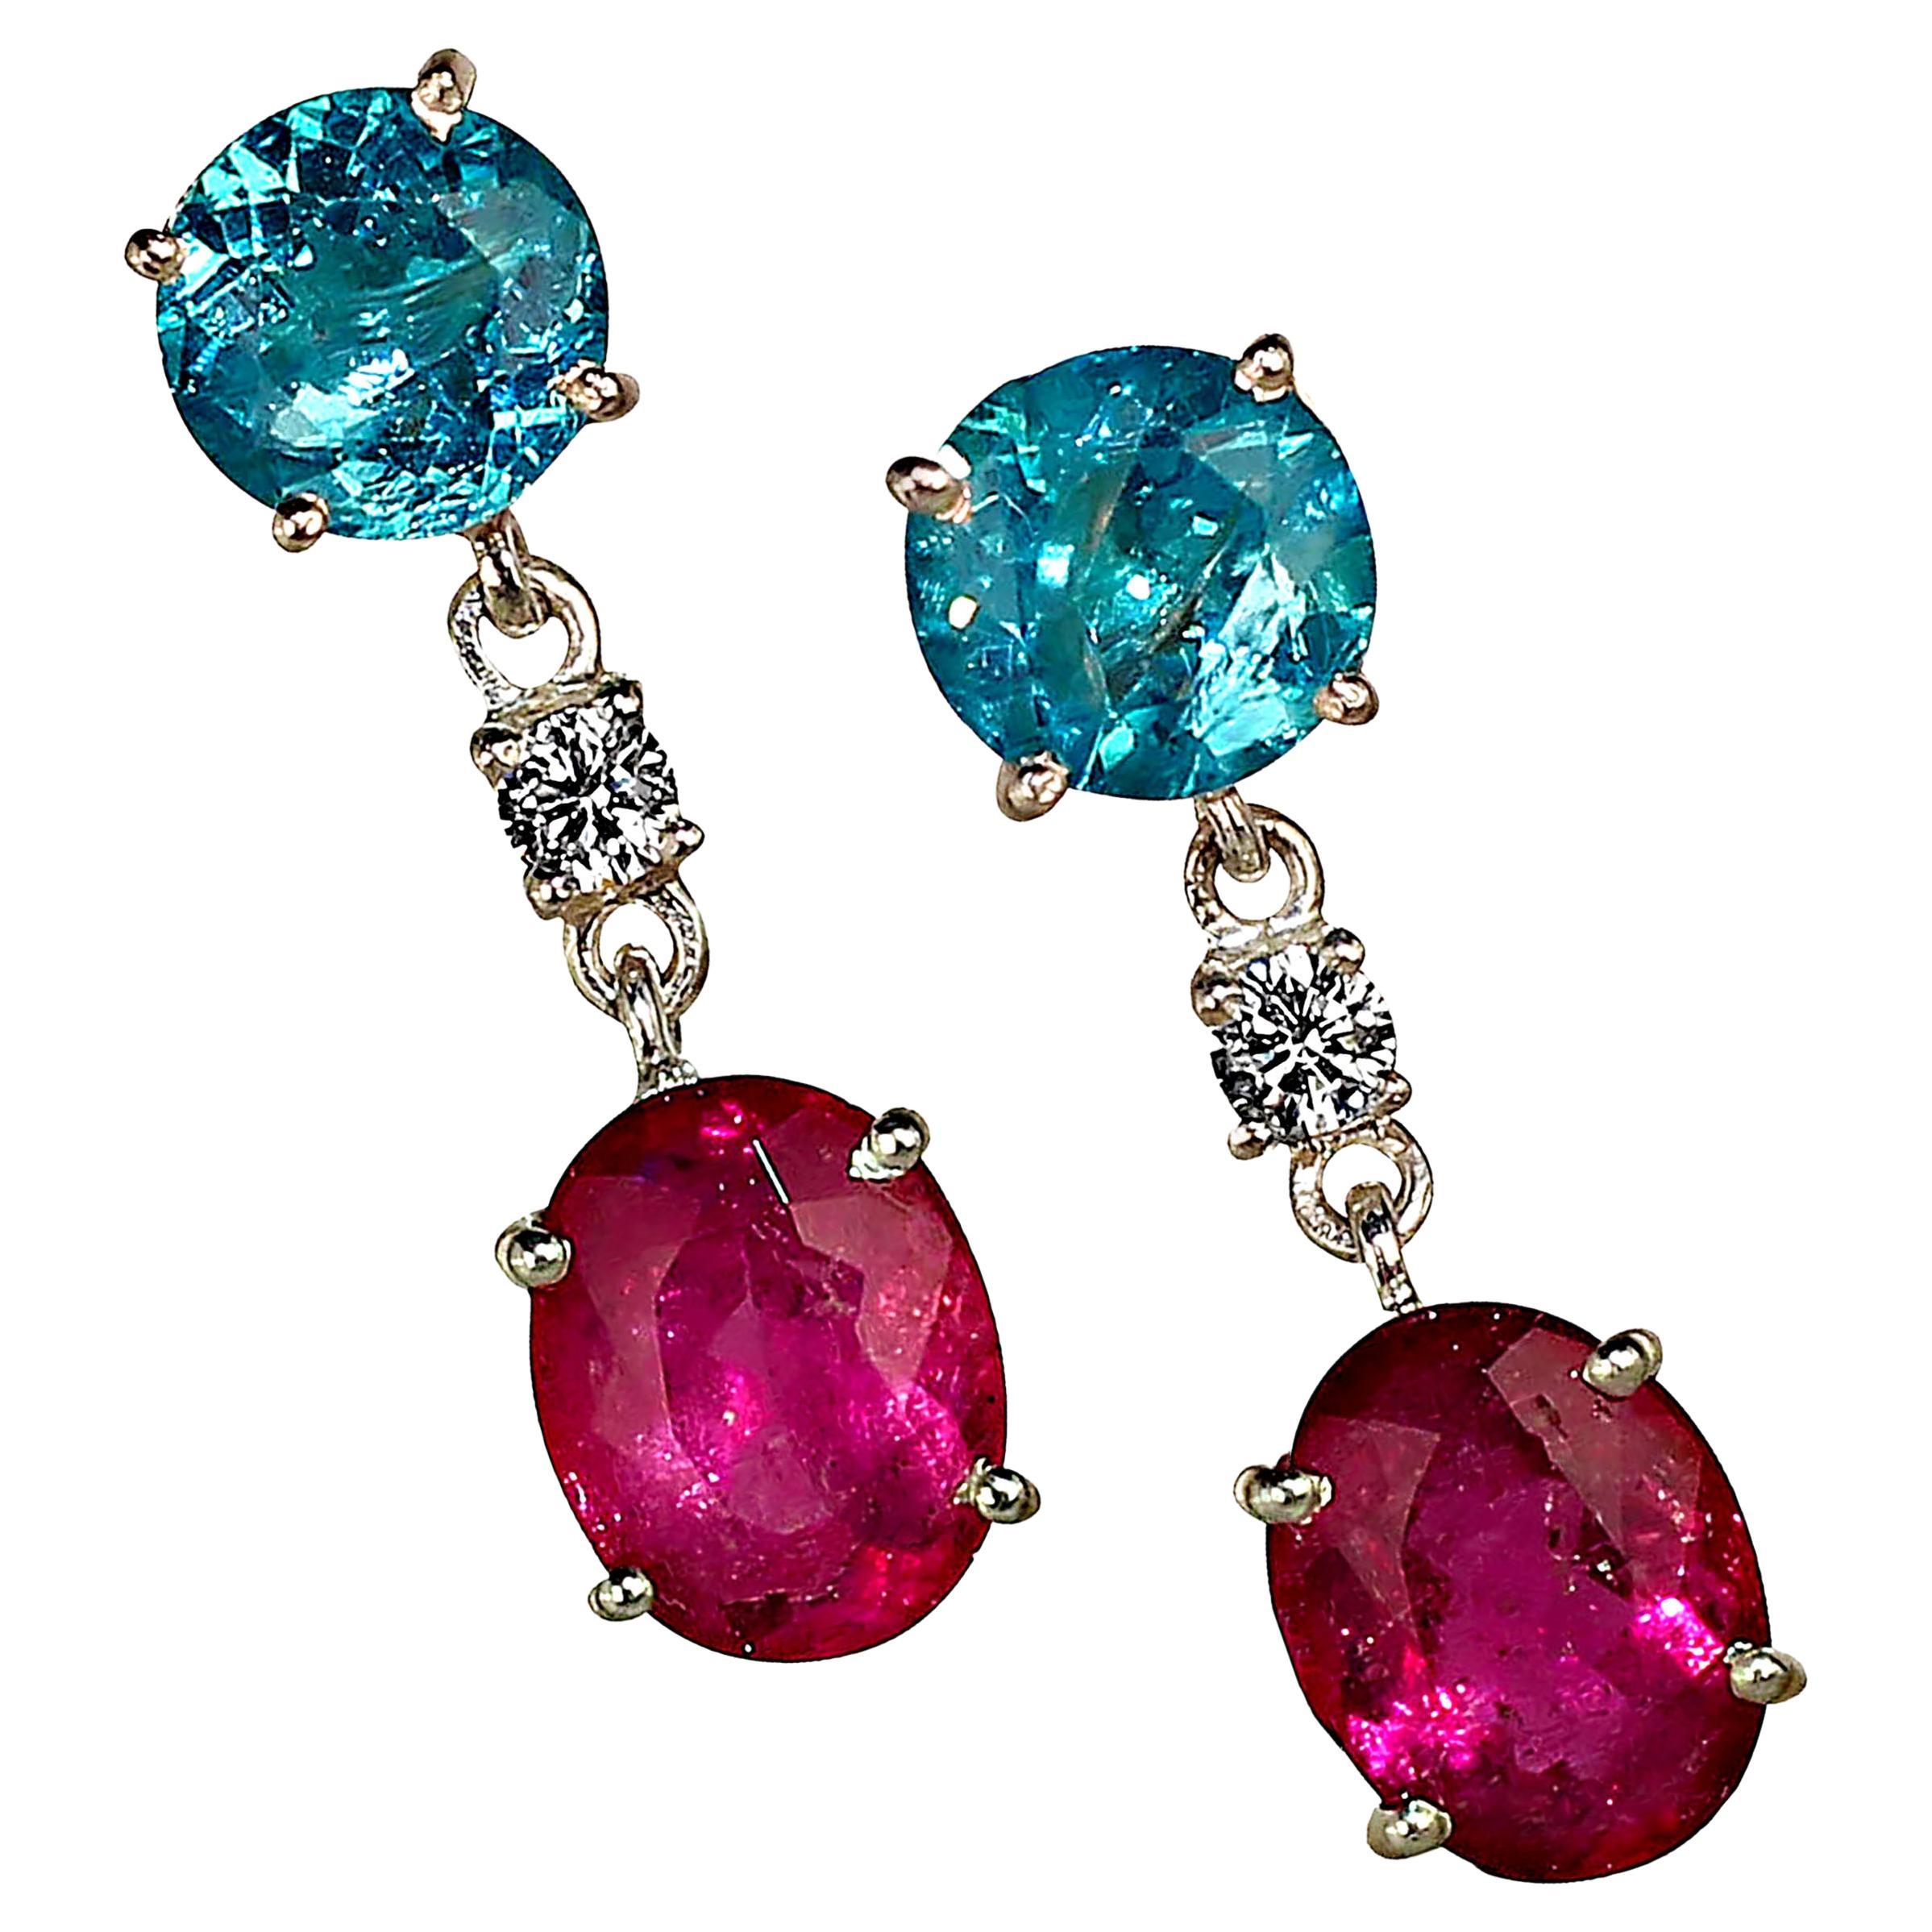 AJD Sizzling Pink and Blue/Green Swinging Earrings